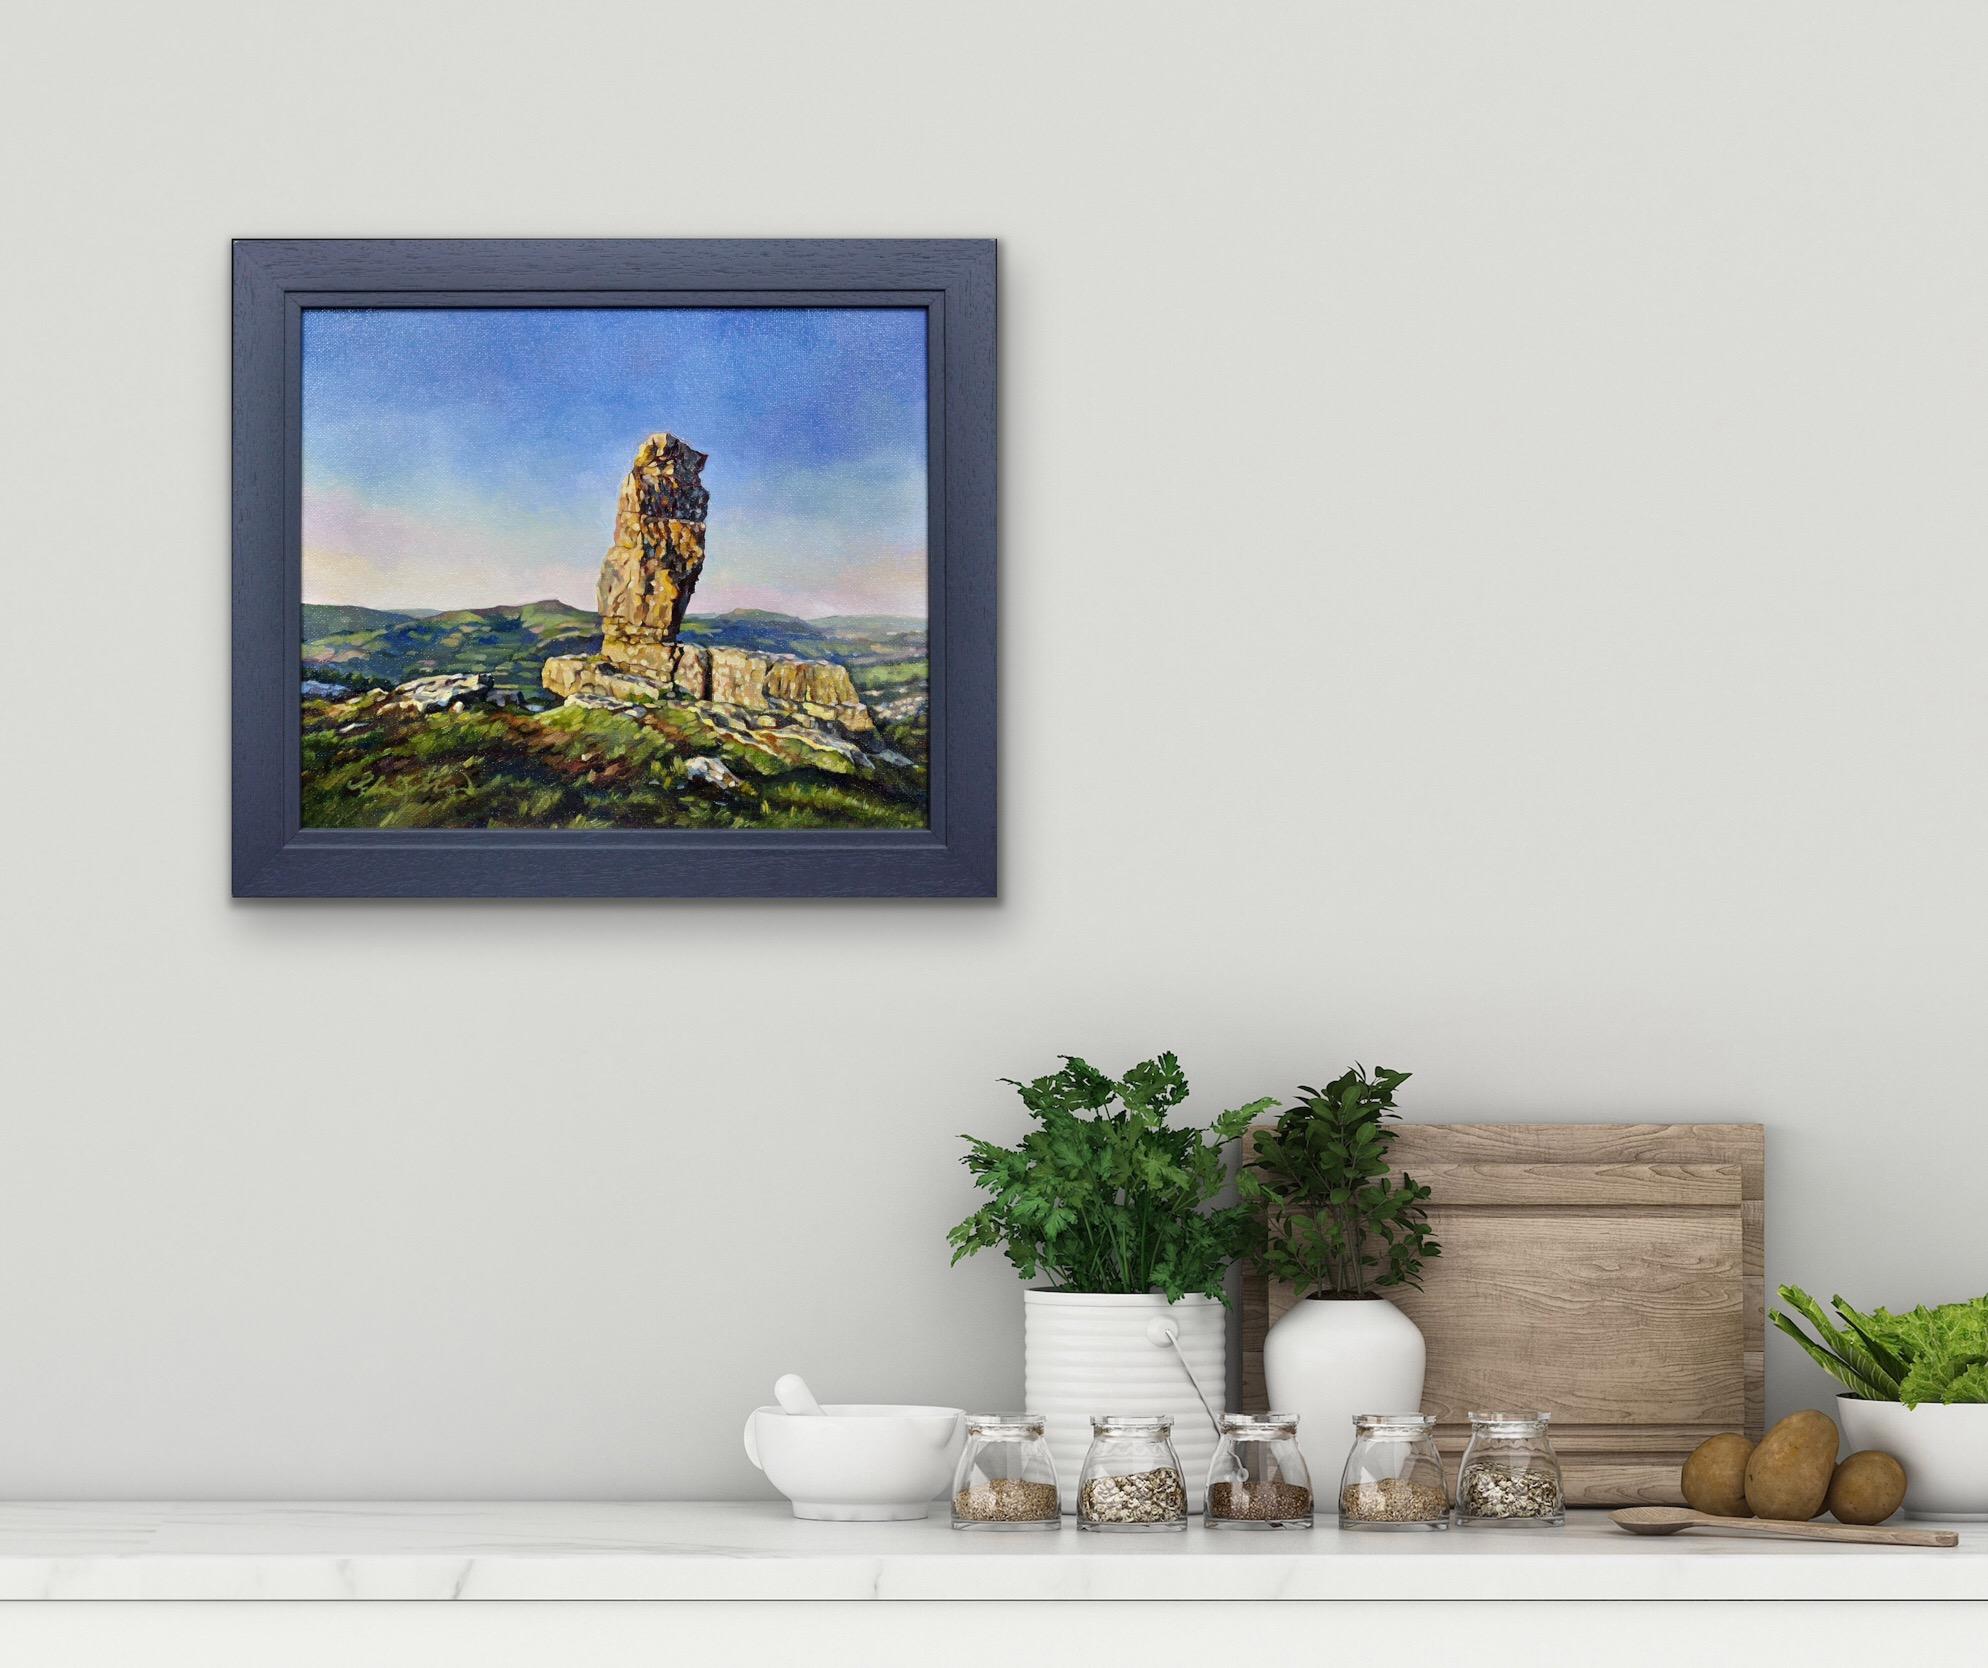 Y Bugail Unig (The Lonely Shepherd), Llangattock, Brecon Beacons. Welsh Folklore For Sale 1